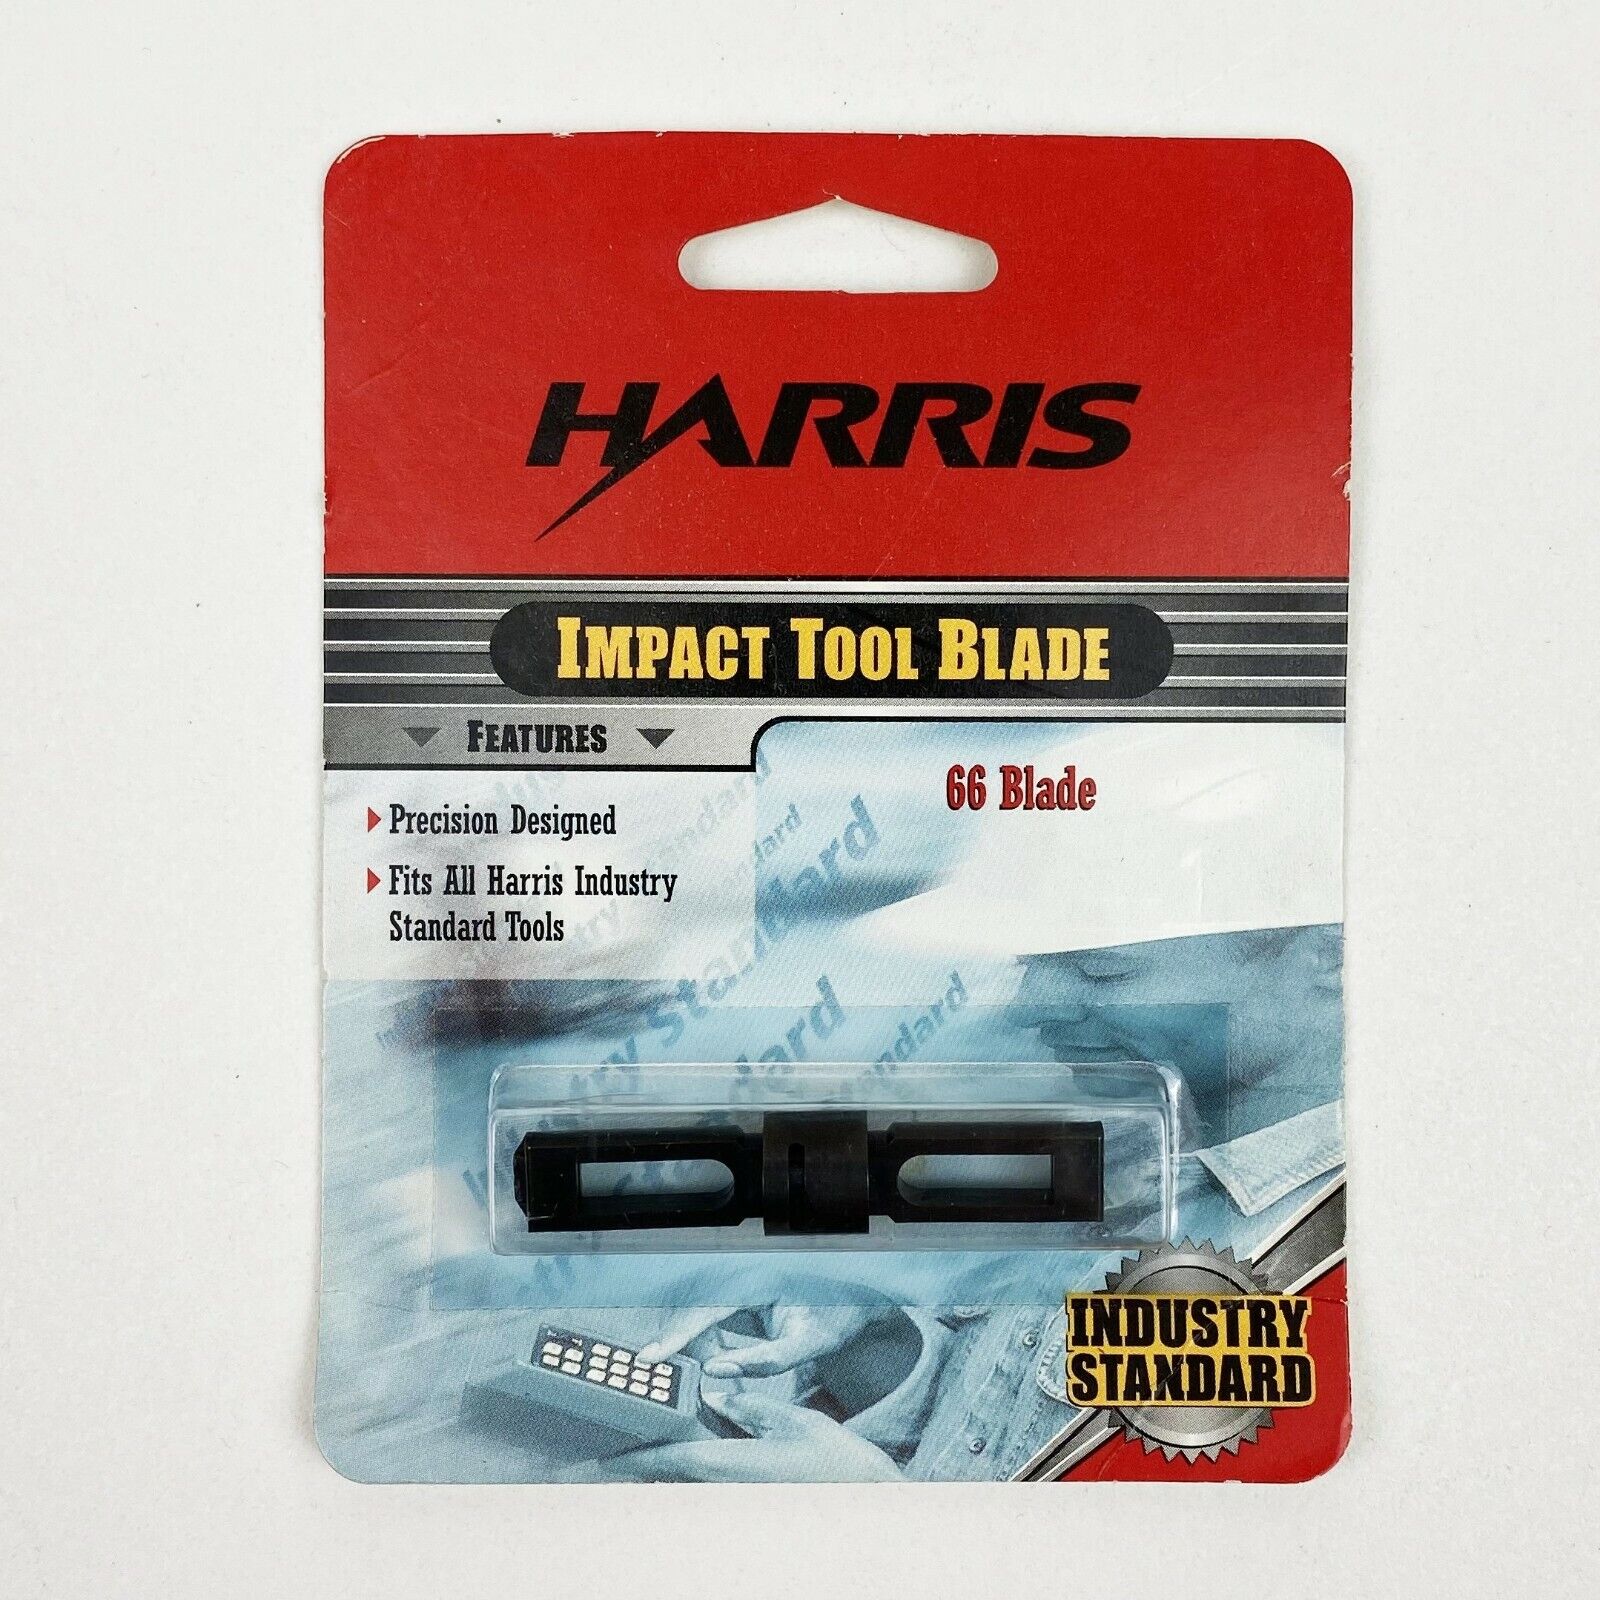 Harris Impact Tool Blade 66 for D914 Impact Tools Brand New Old Stock in Package